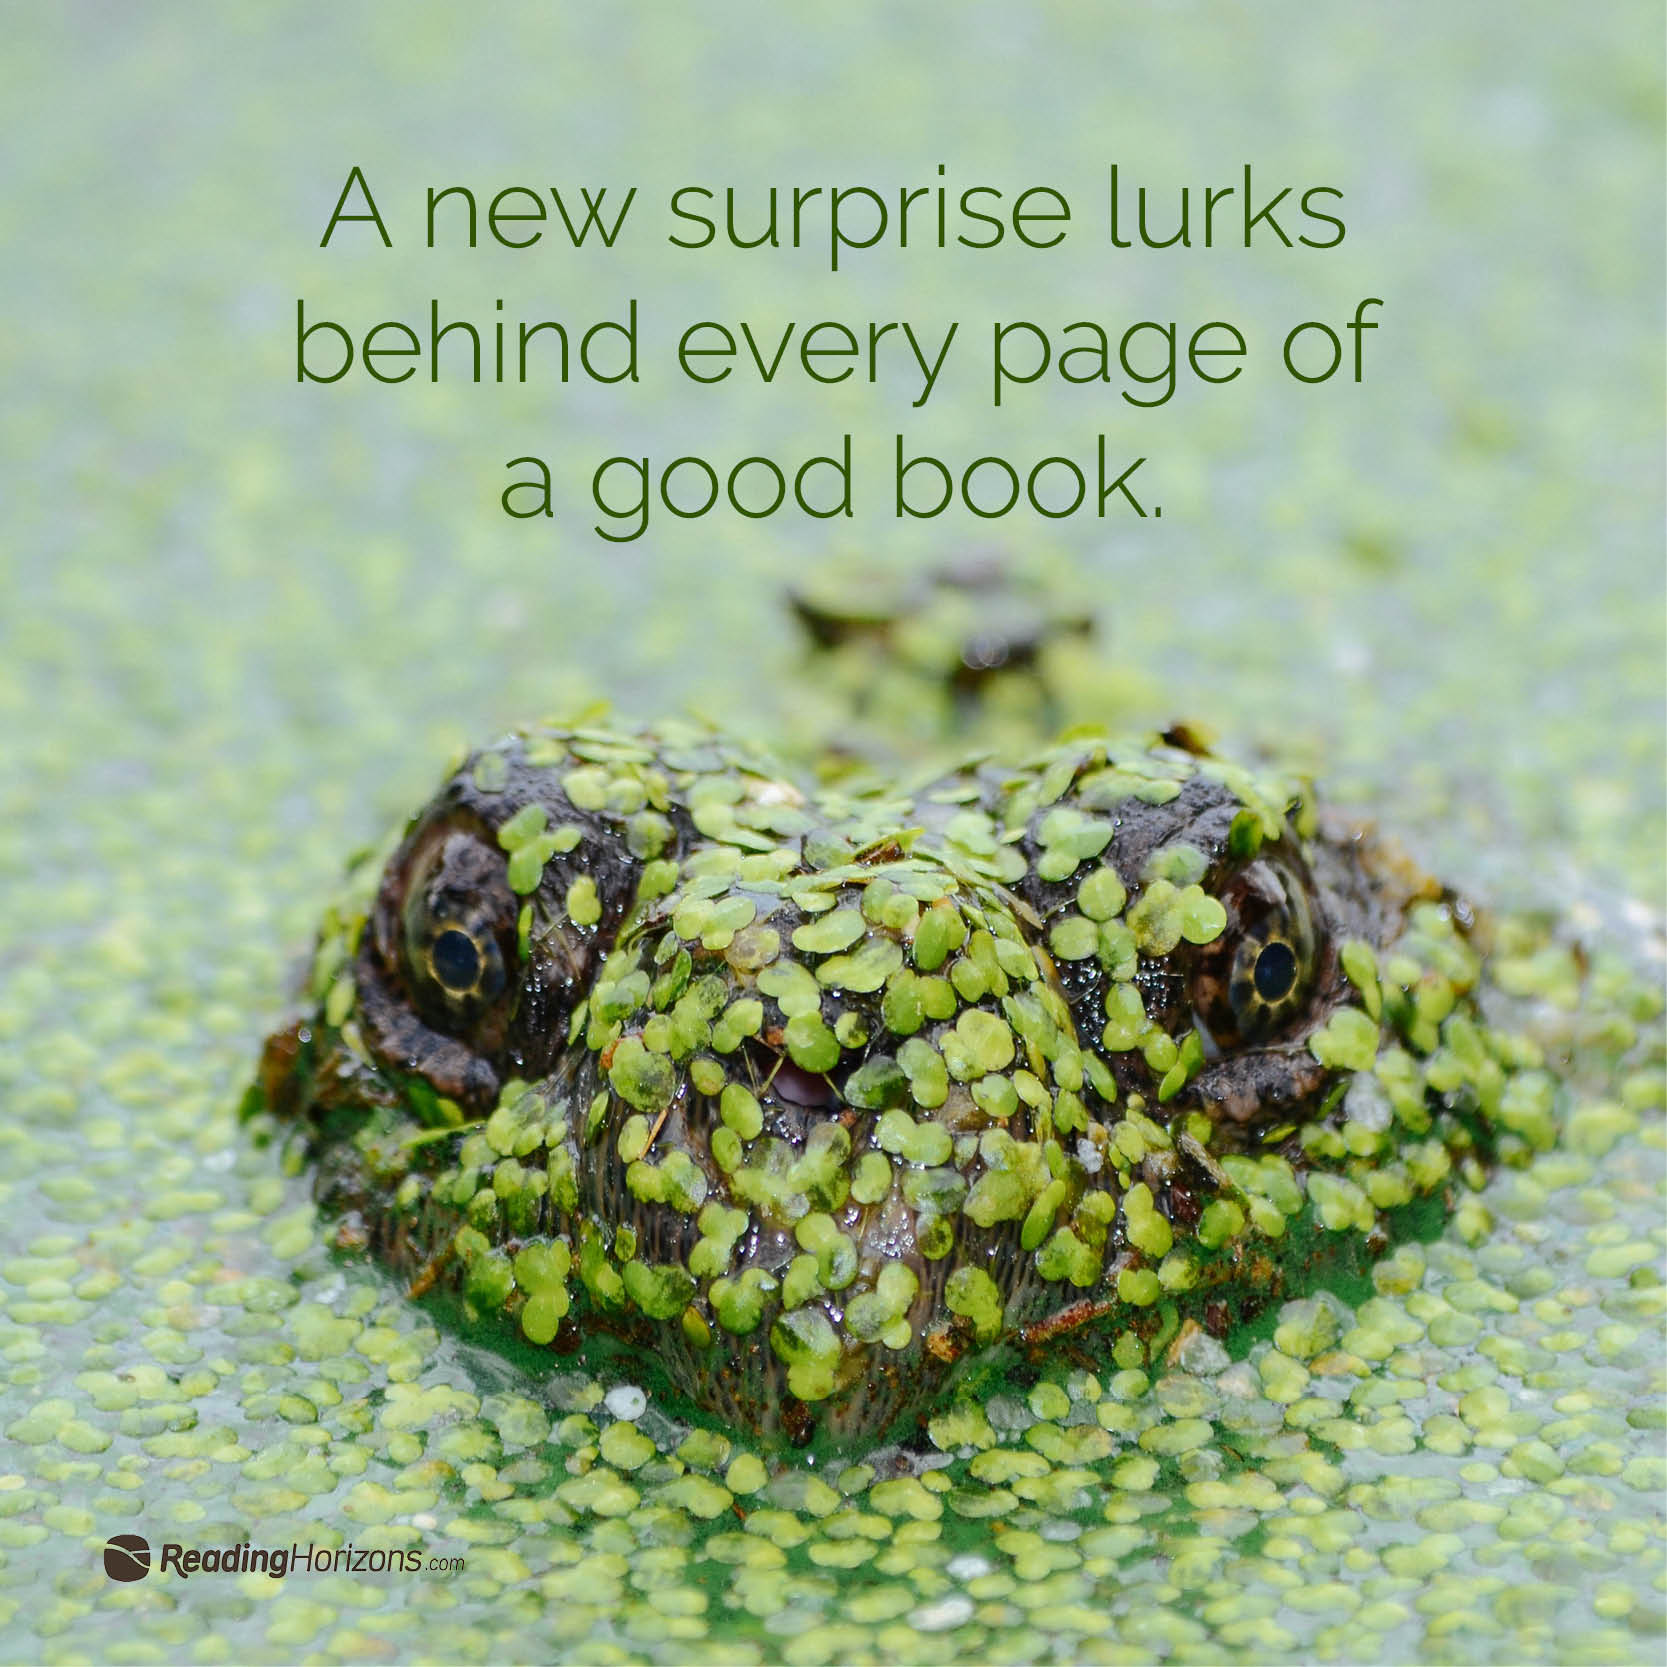 A meme of a snake coming out of a swamp with the words "A new surprise lurks behind every page of a good book."